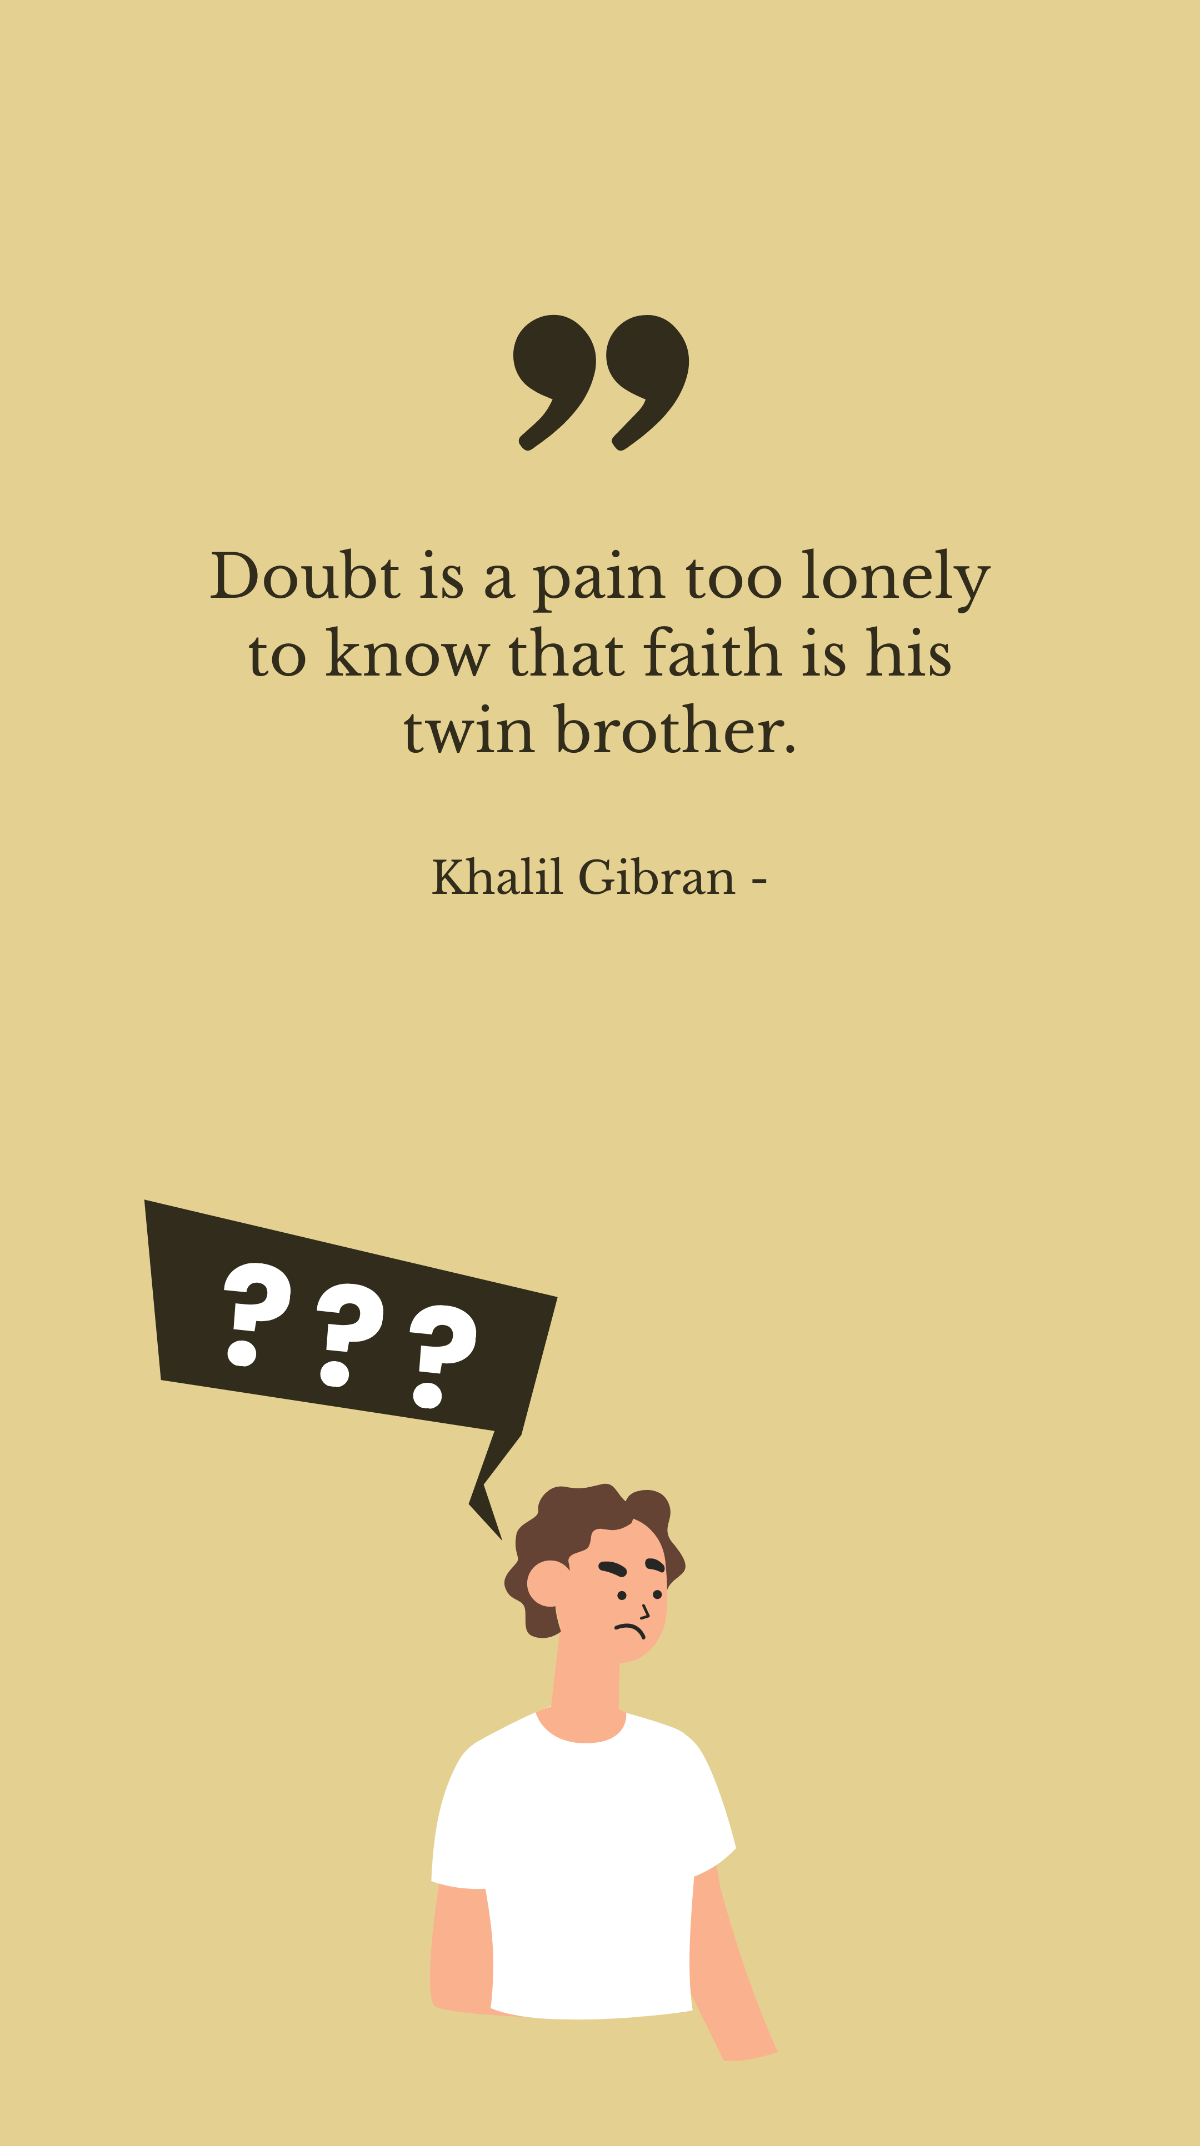 Khalil Gibran - Doubt is a pain too lonely to know that faith is his twin brother. Template